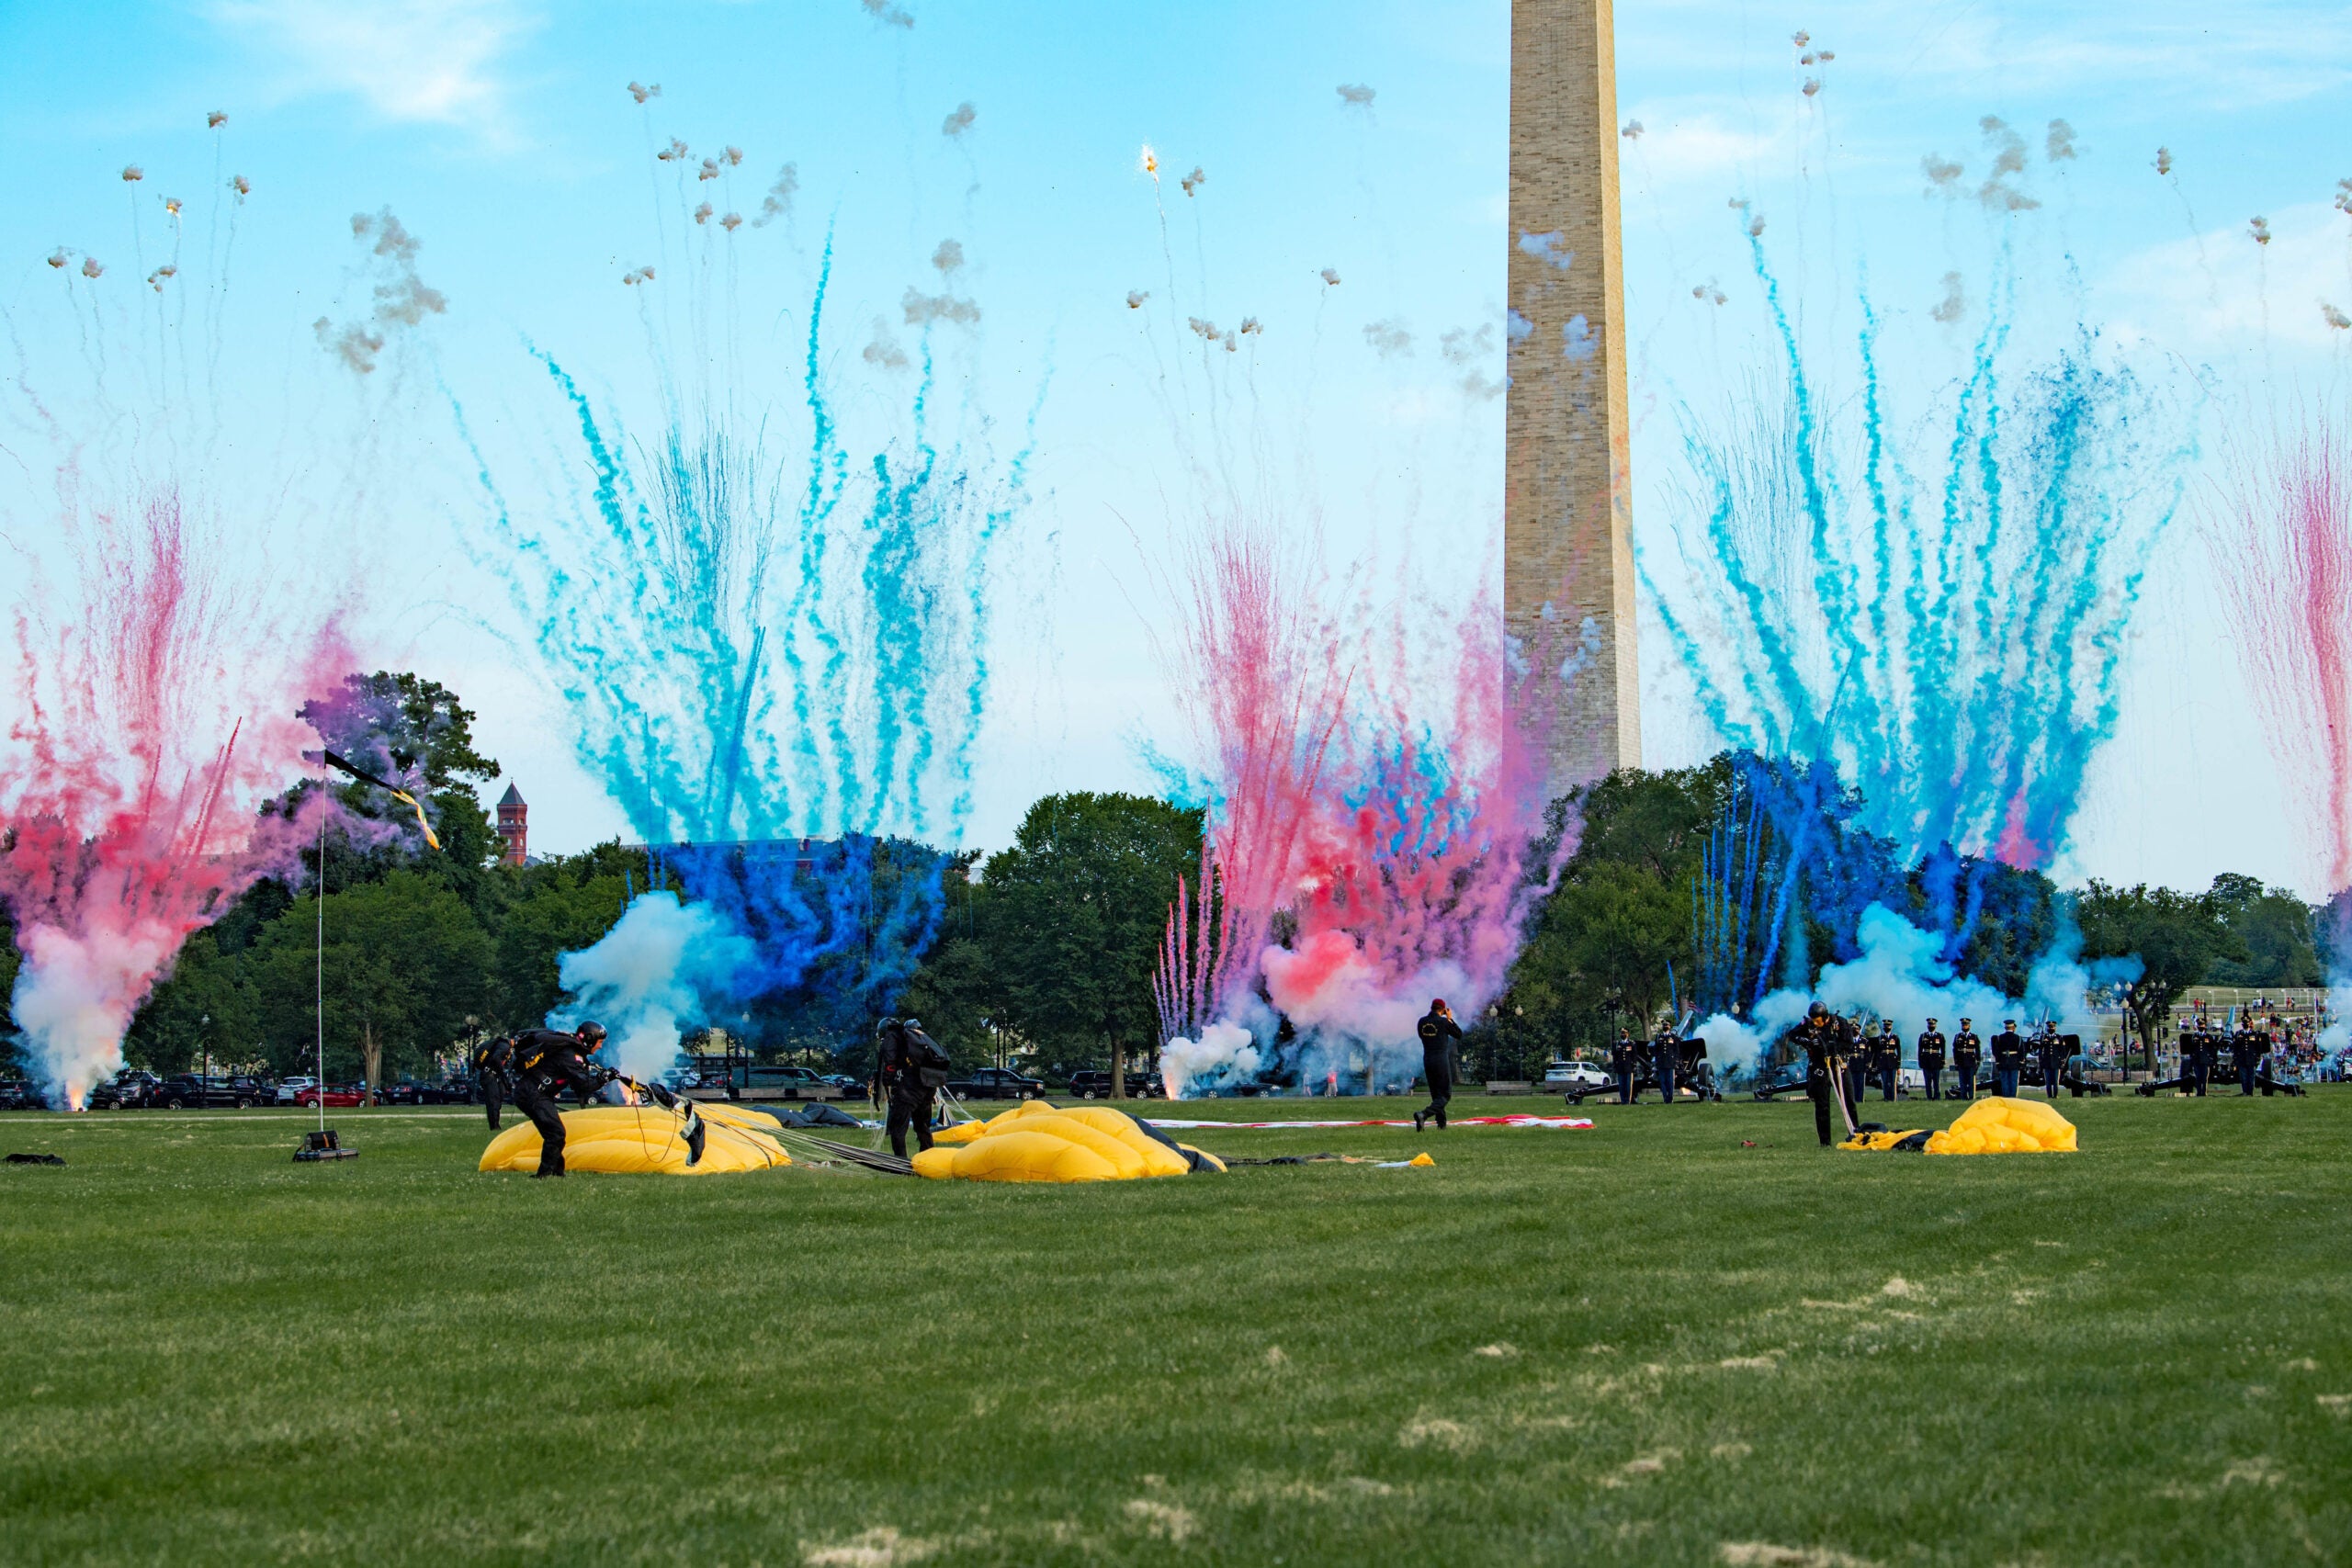 A firework display goes off shortly after a twenty-one cannon salute is fired by the Presidential Salute Battery, 3d U.S. Infantry Regiment (The Old Guard) and the U.S. Army Golden Knights parachuting onto White House grounds during Salute to America July 4, 2020.  The event provided the Department of Defense with an opportunity to demonstrate the capabilities and professionalism of the Armed Forces. (U.S. Army Photo by Sgt. Kevin Roy)